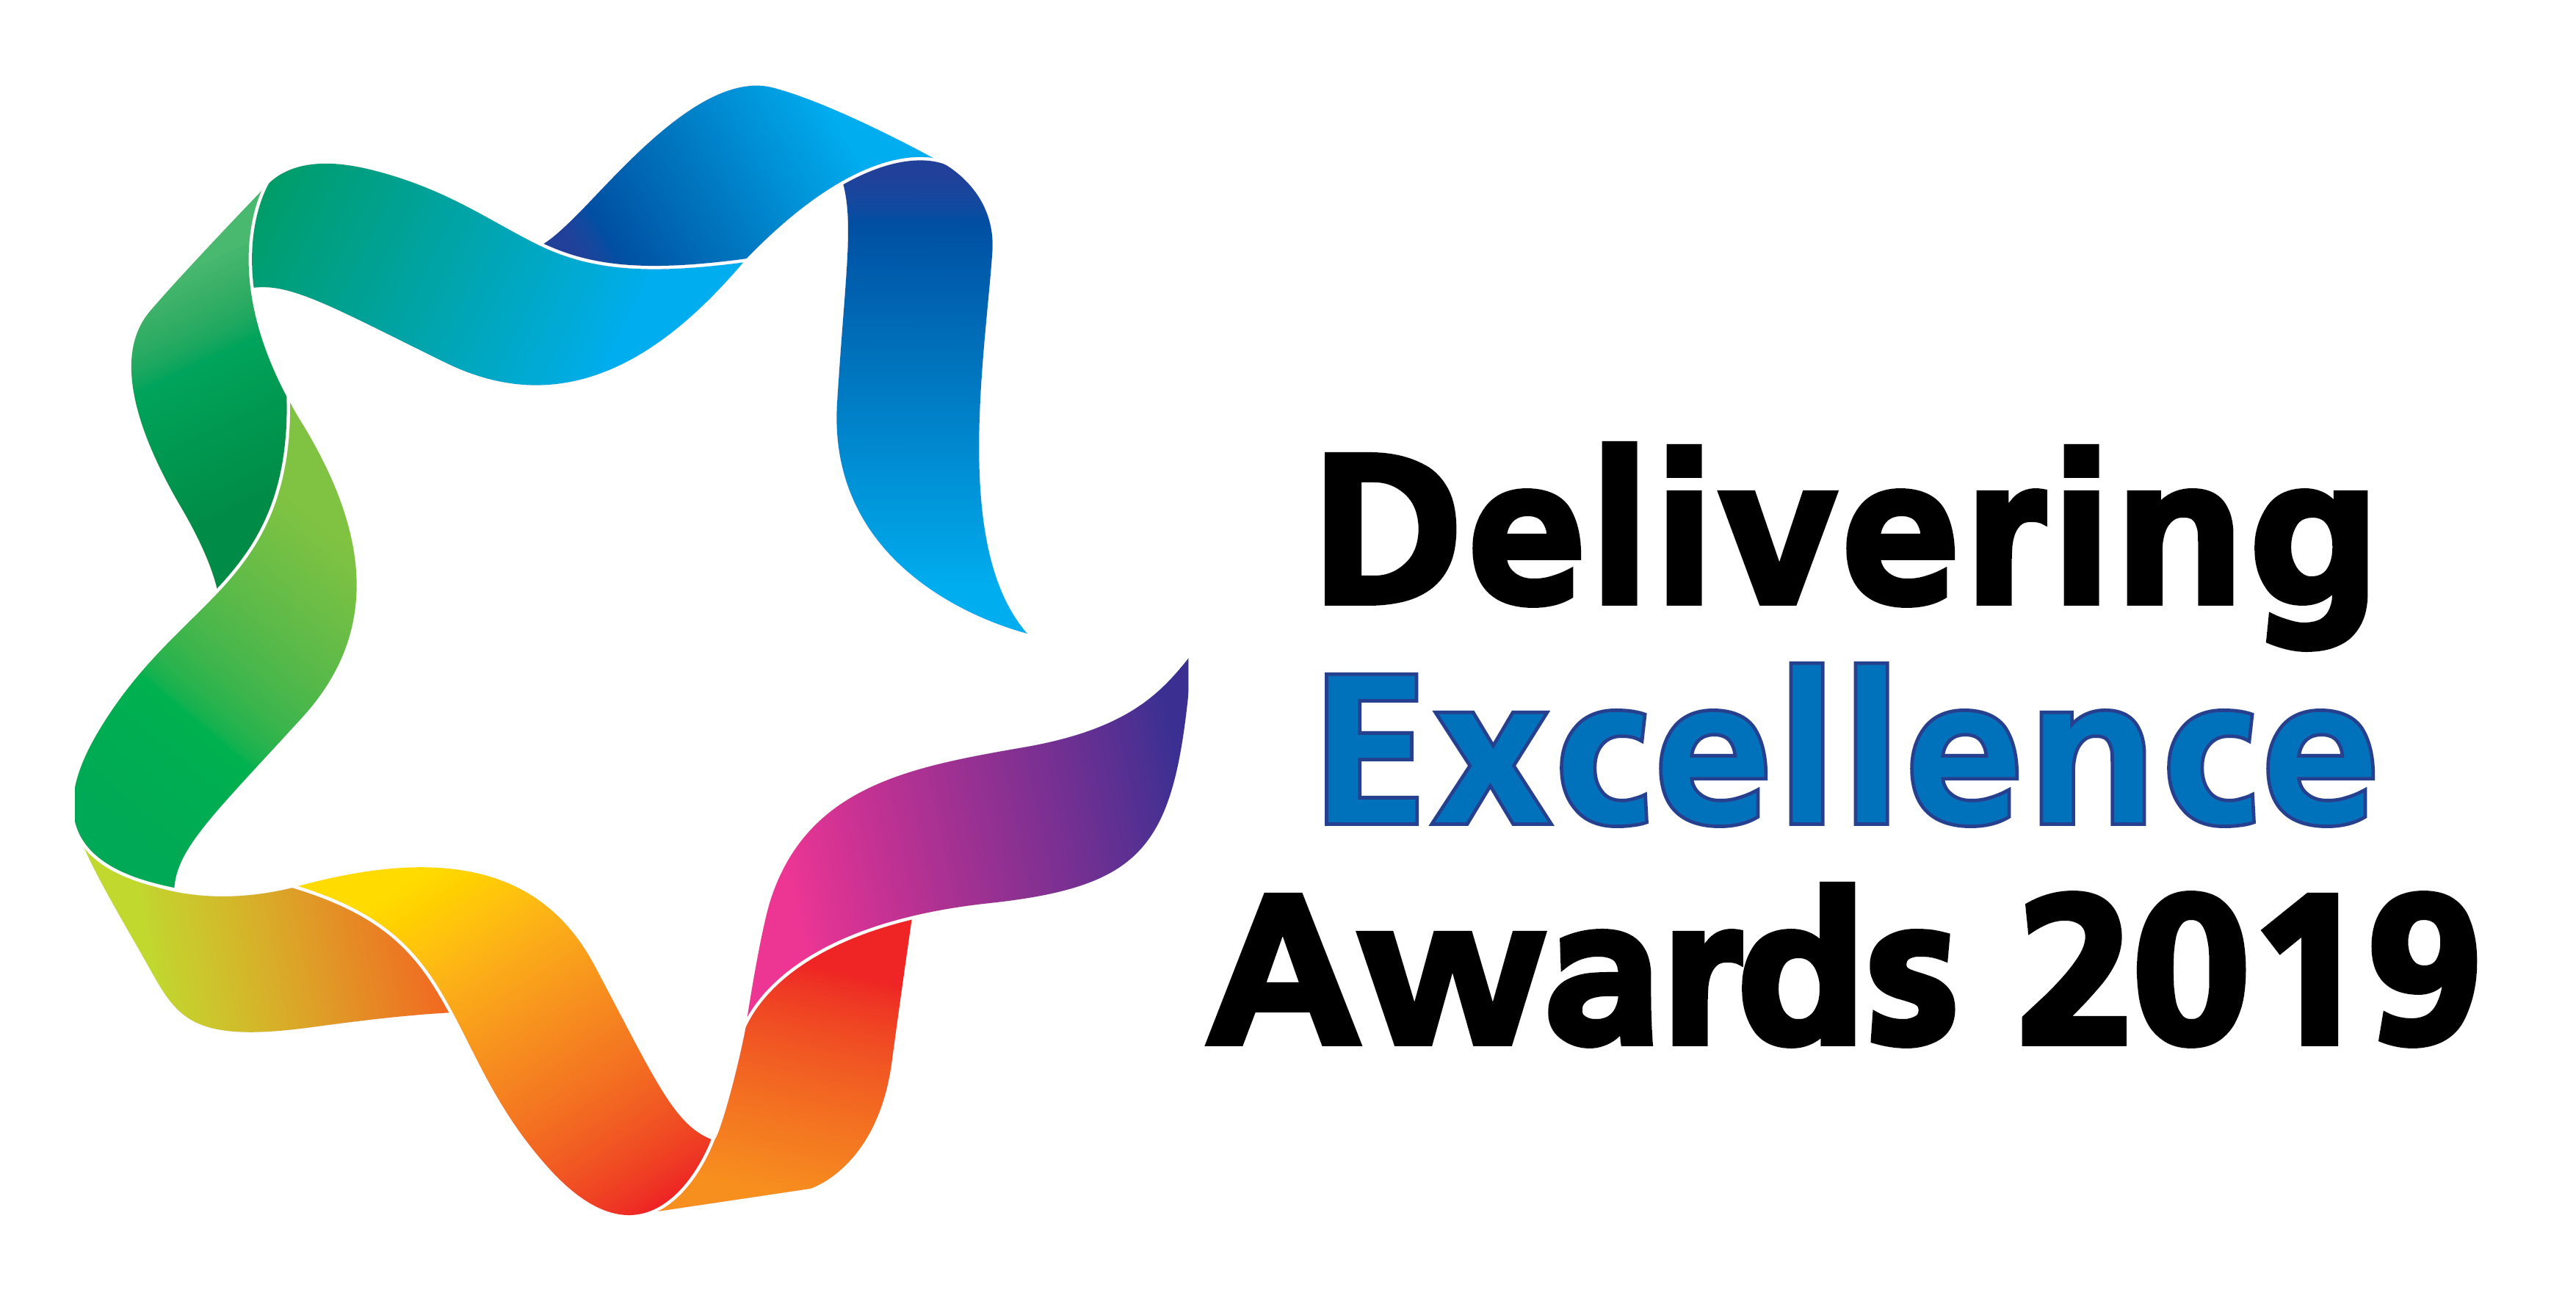 Delivering Excellence Awards 2019: shortlist announced